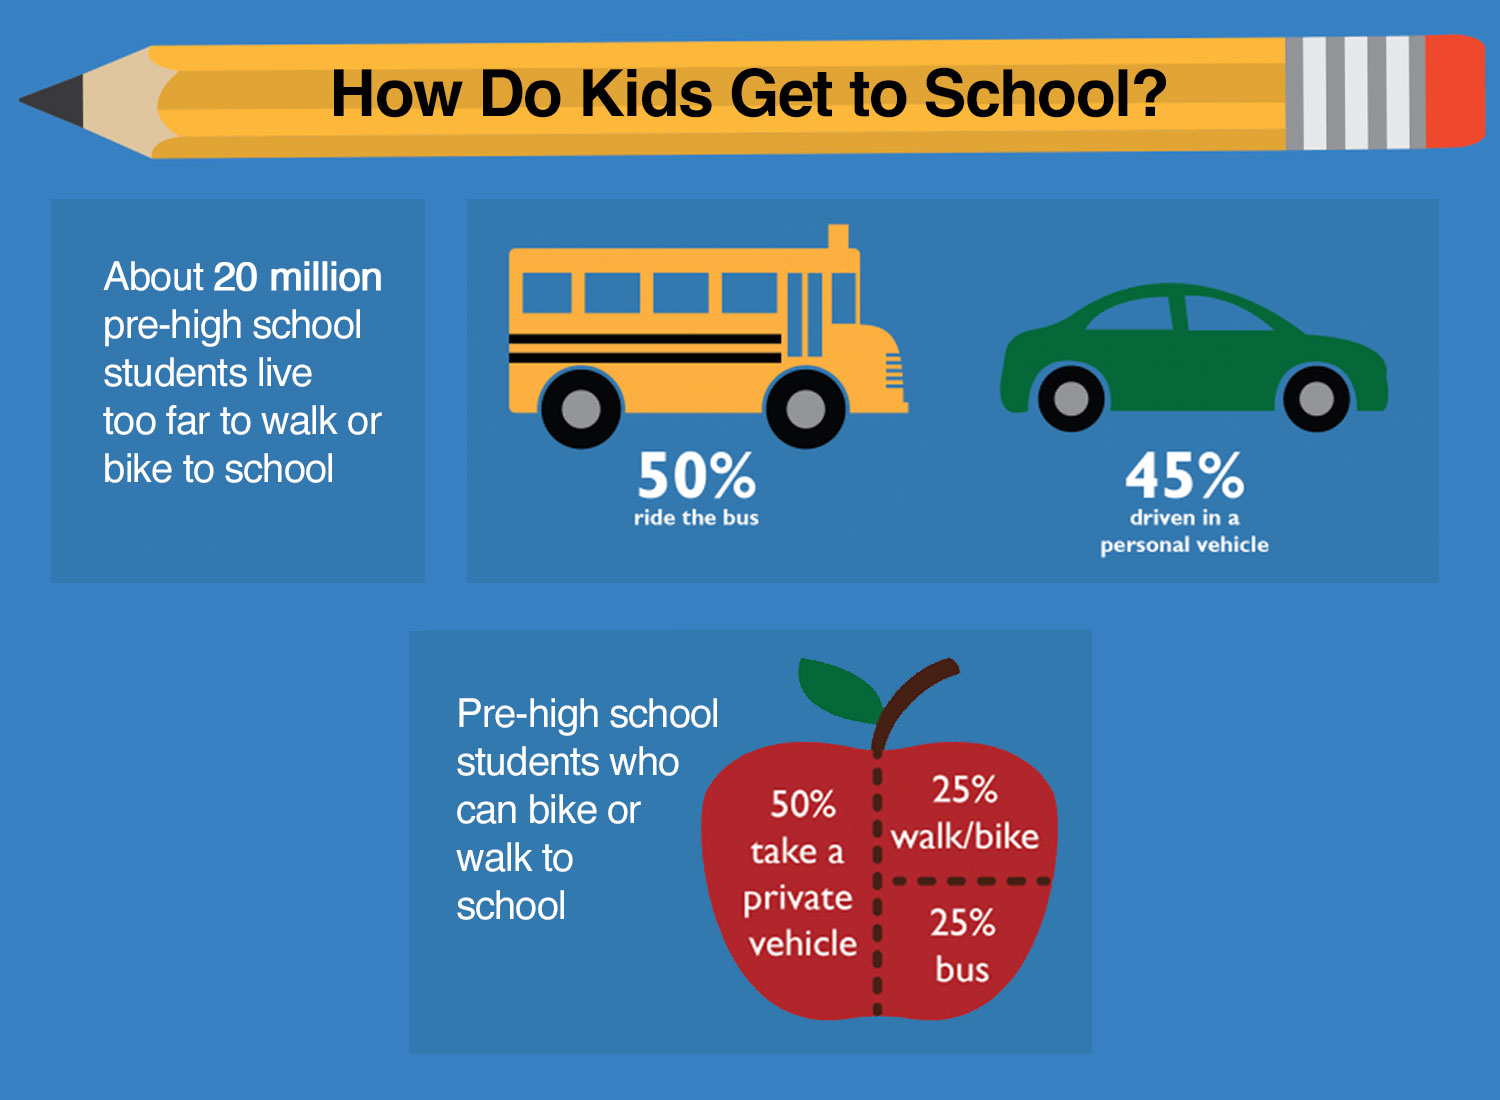 Graphic called How Do Kids Get to School shows the percentage of students who take buses or cars versus those who walk.